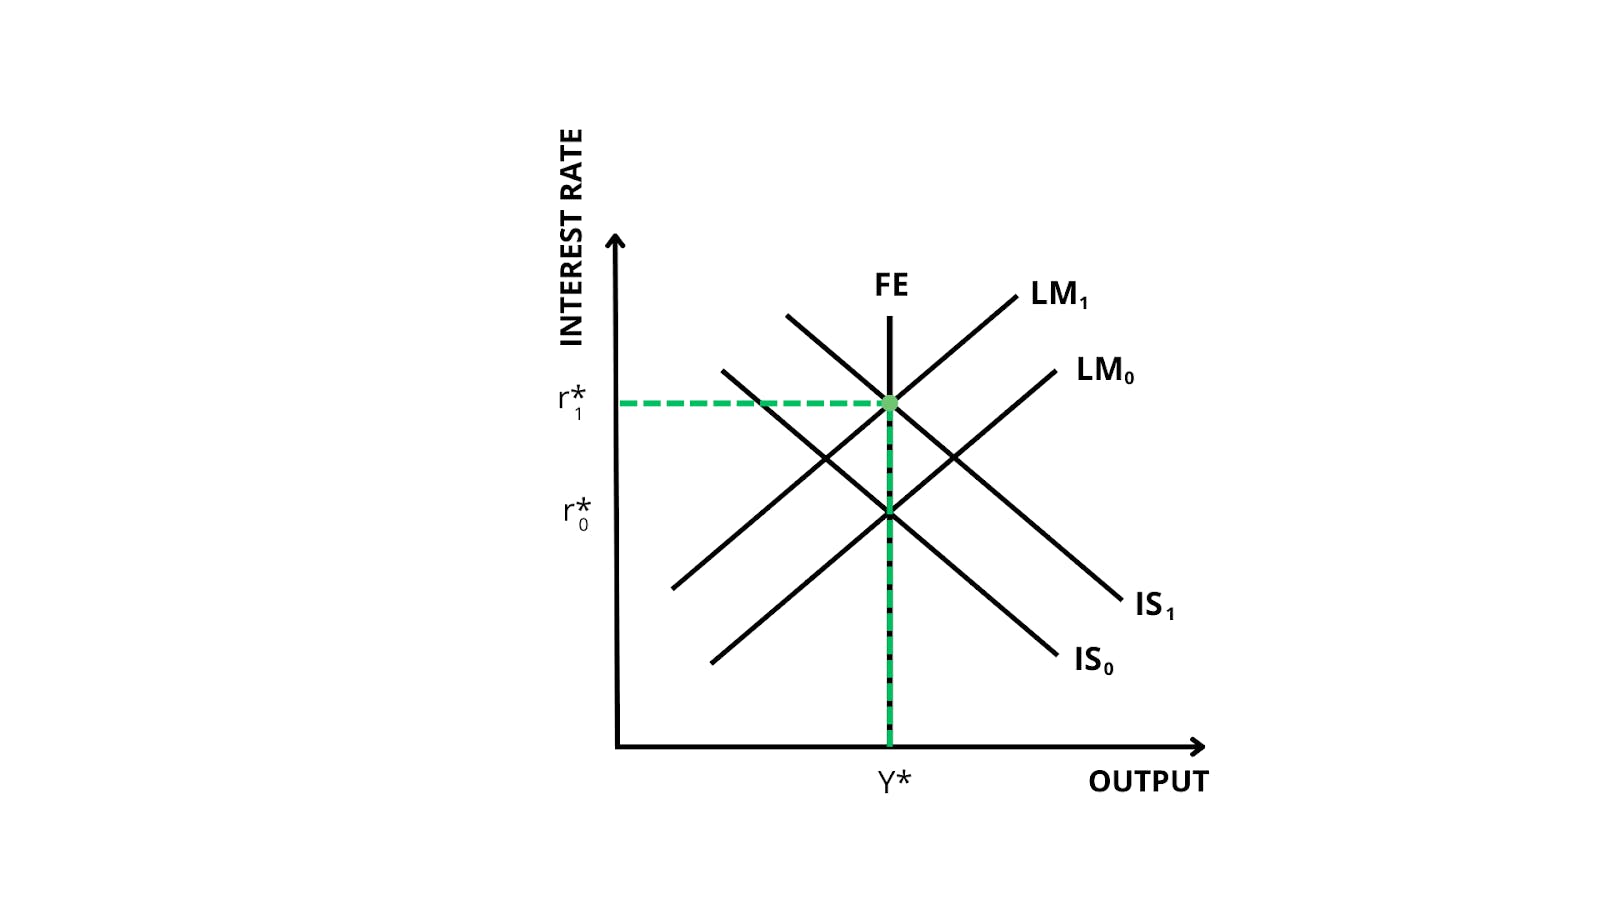 Graph showing new equilibrium output and interest rate after increased government spending